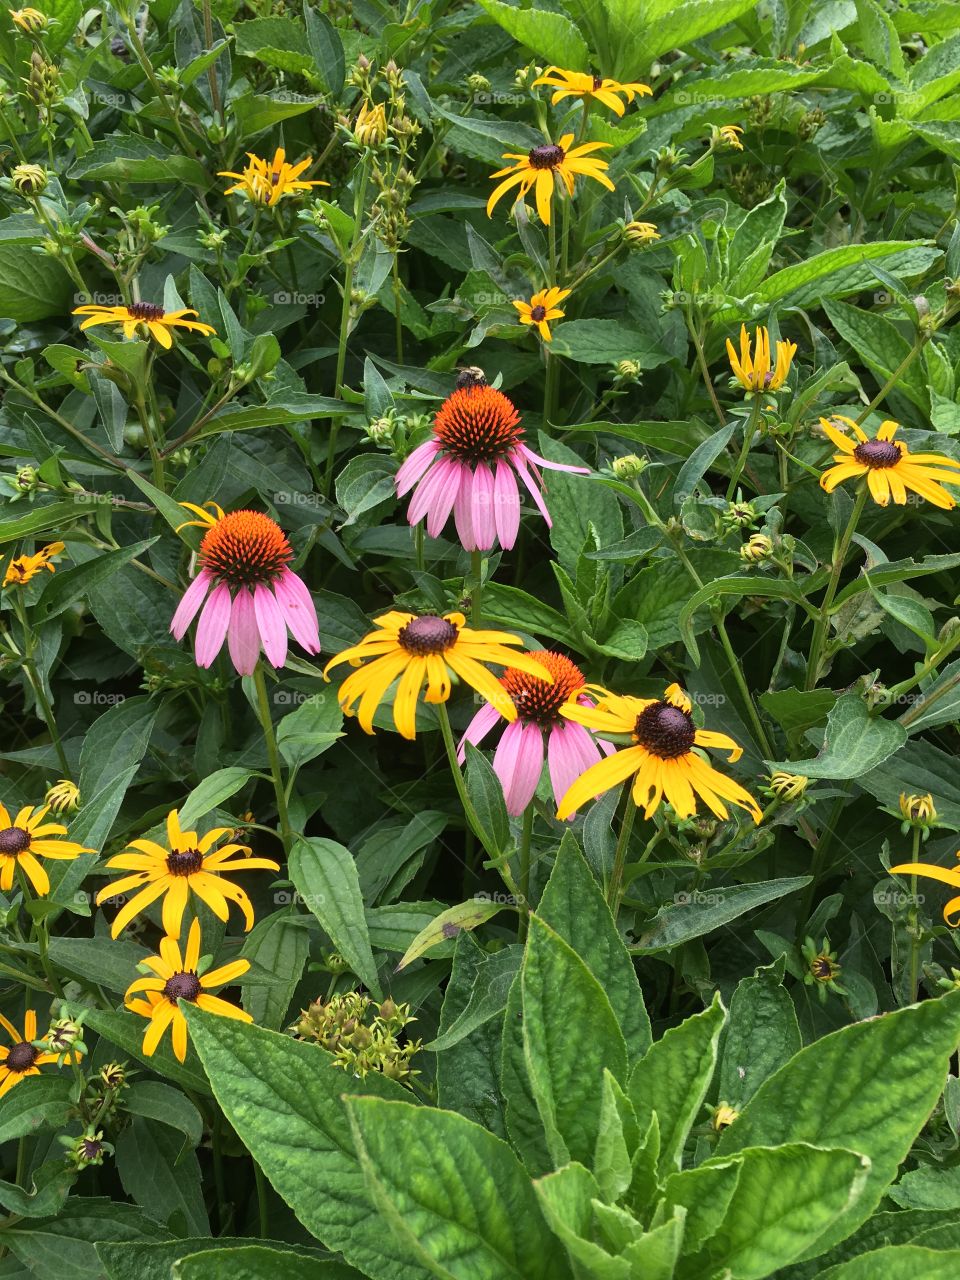 Cone flowers and black eyed Susan’s